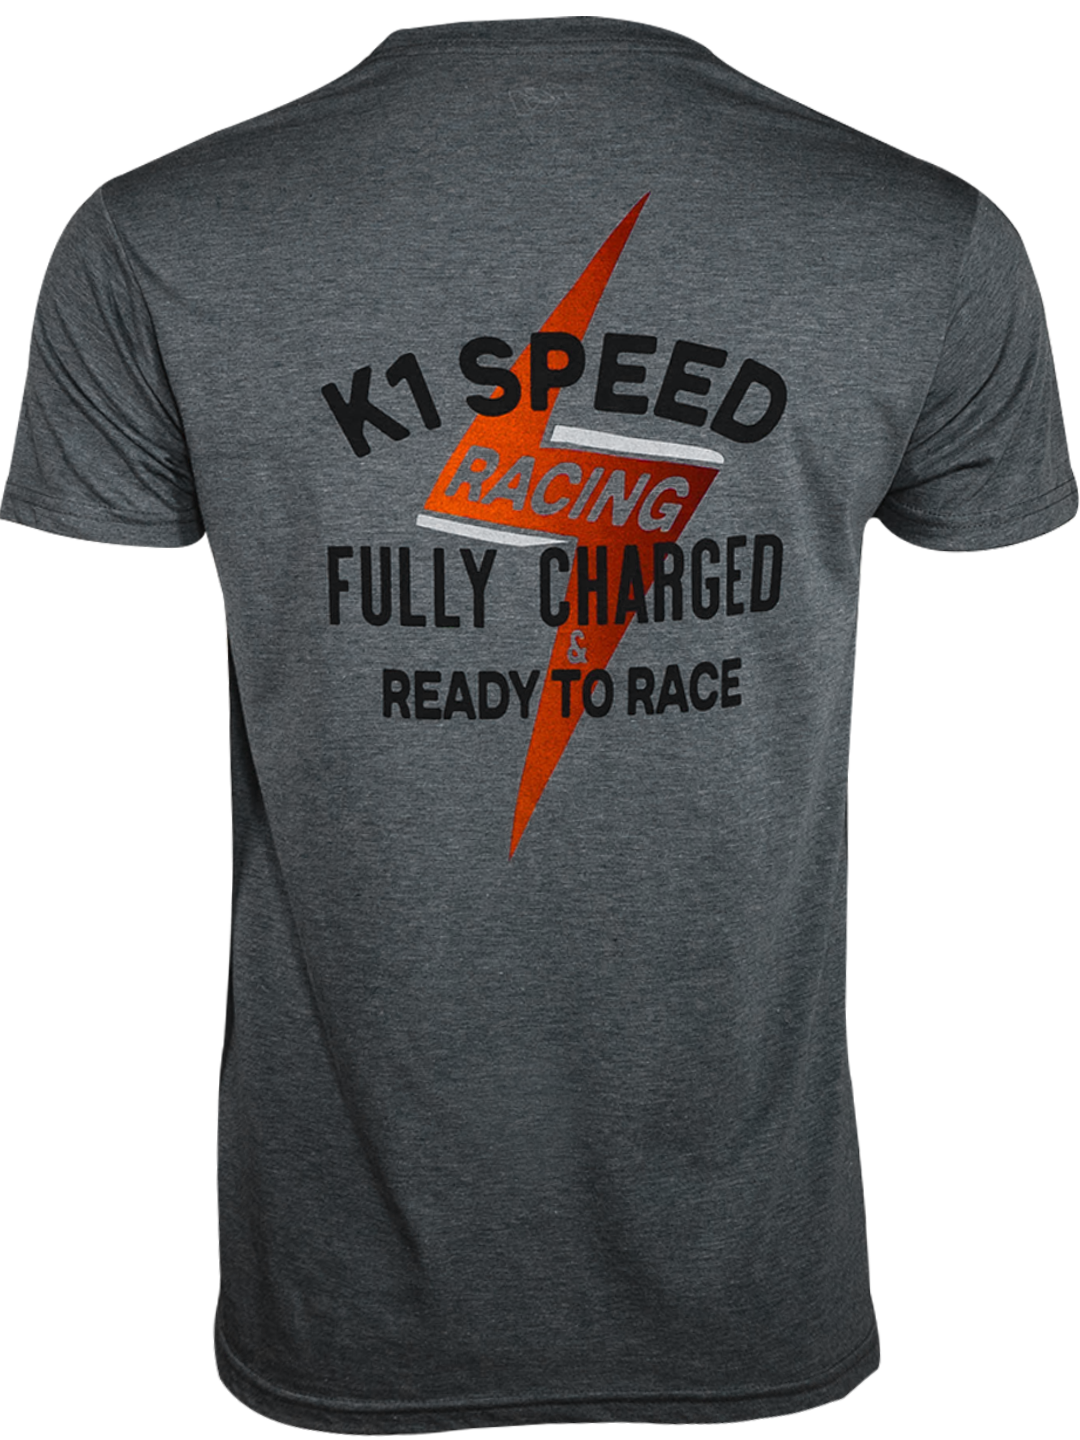 Fully Charged Tee